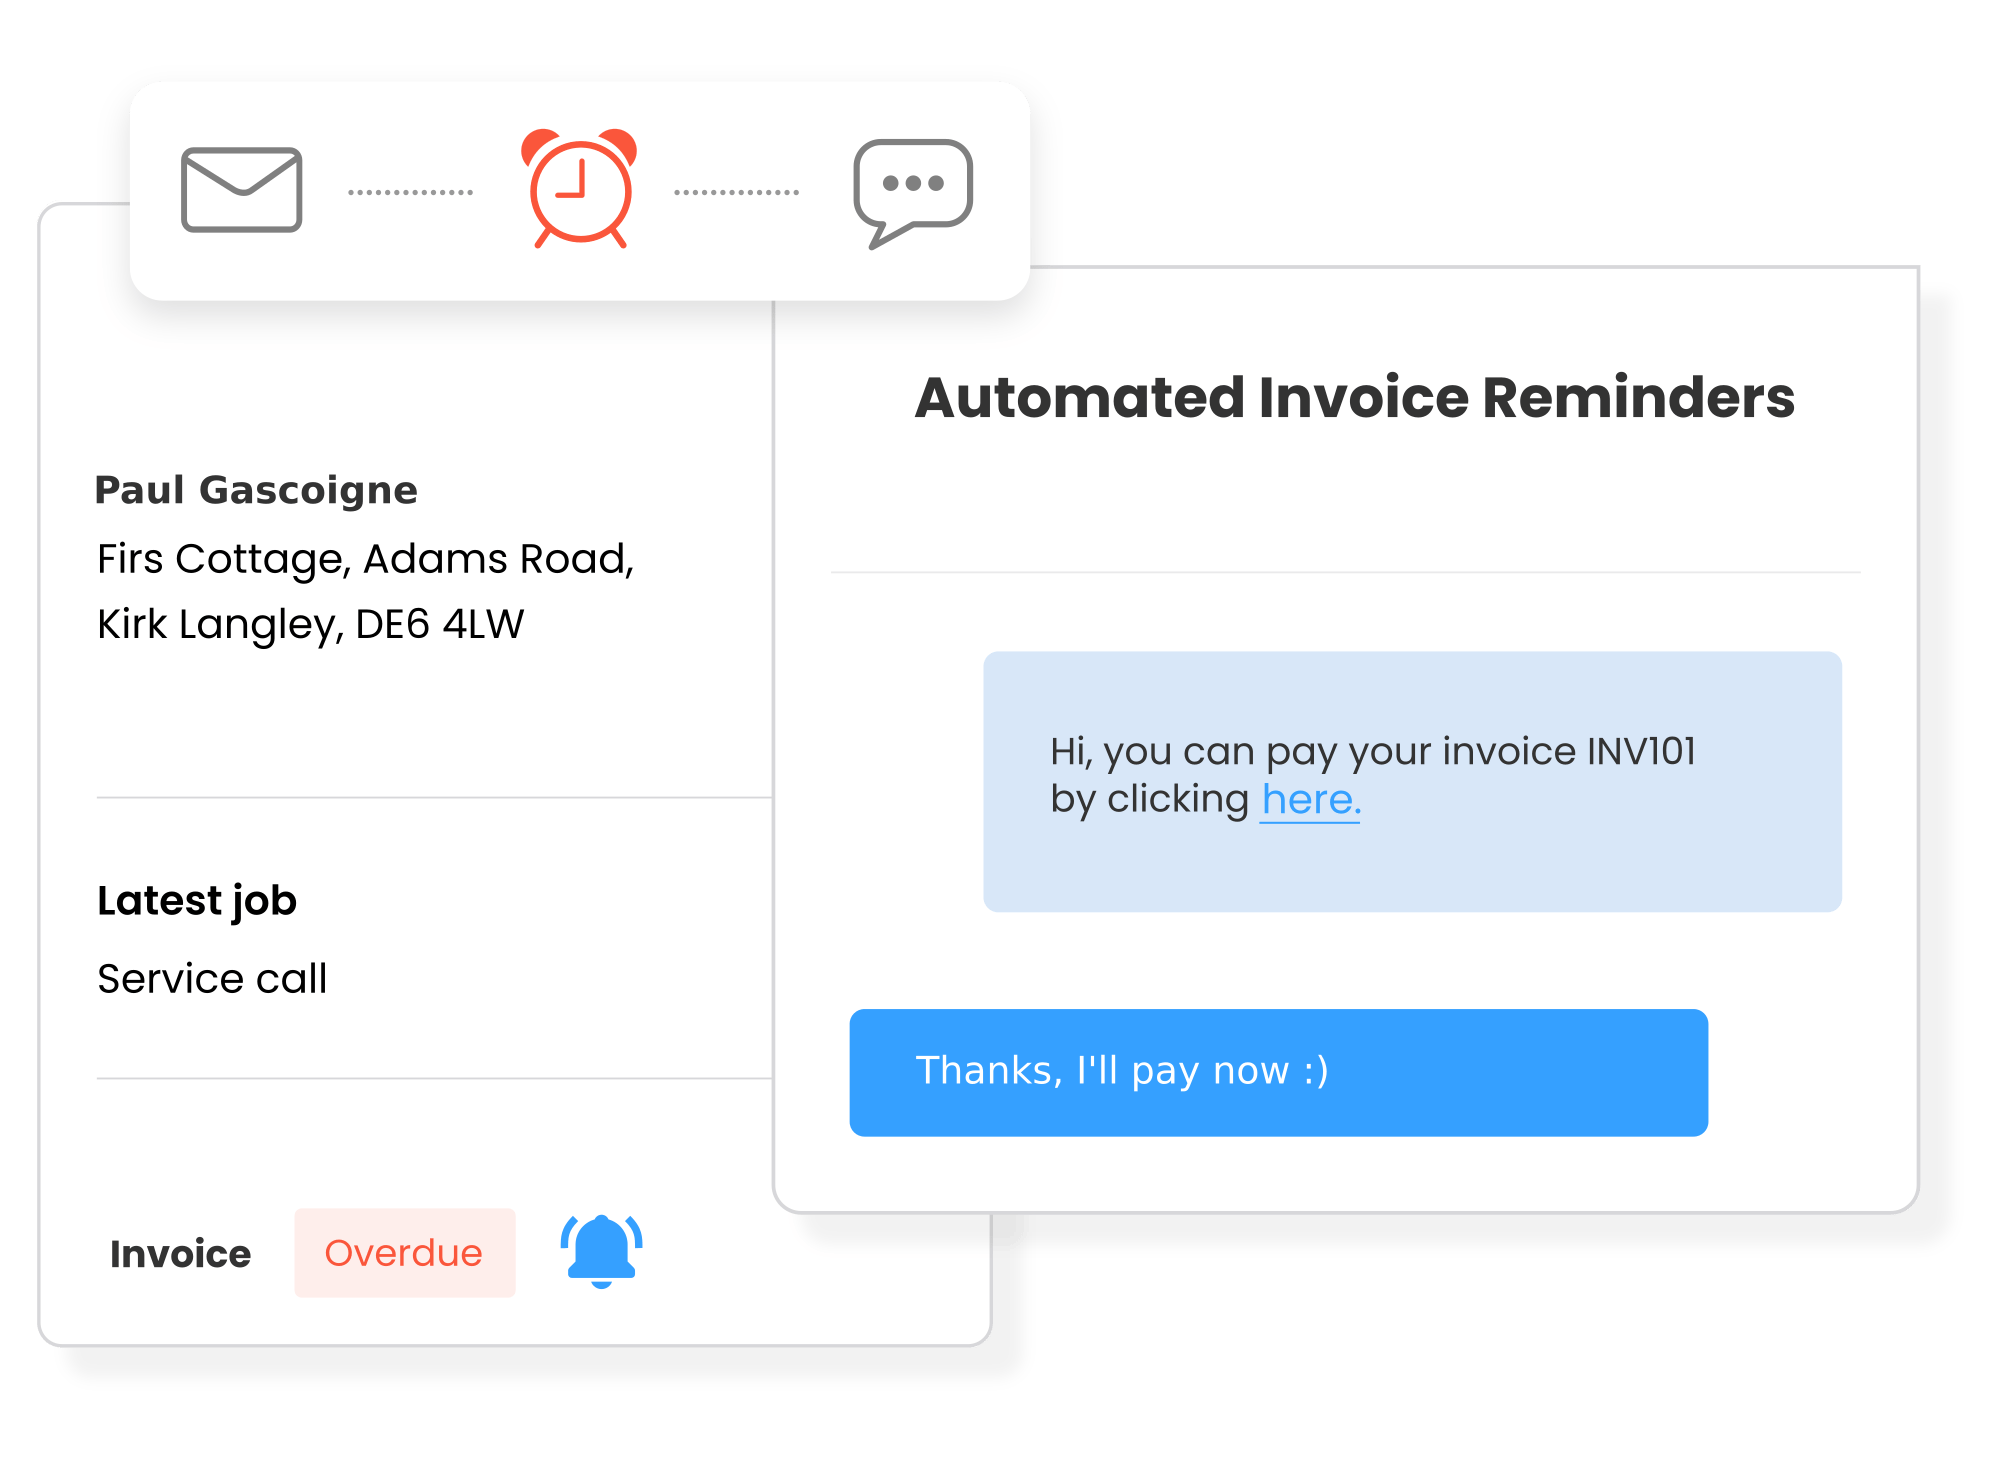 Track your invoices and send payment reminders